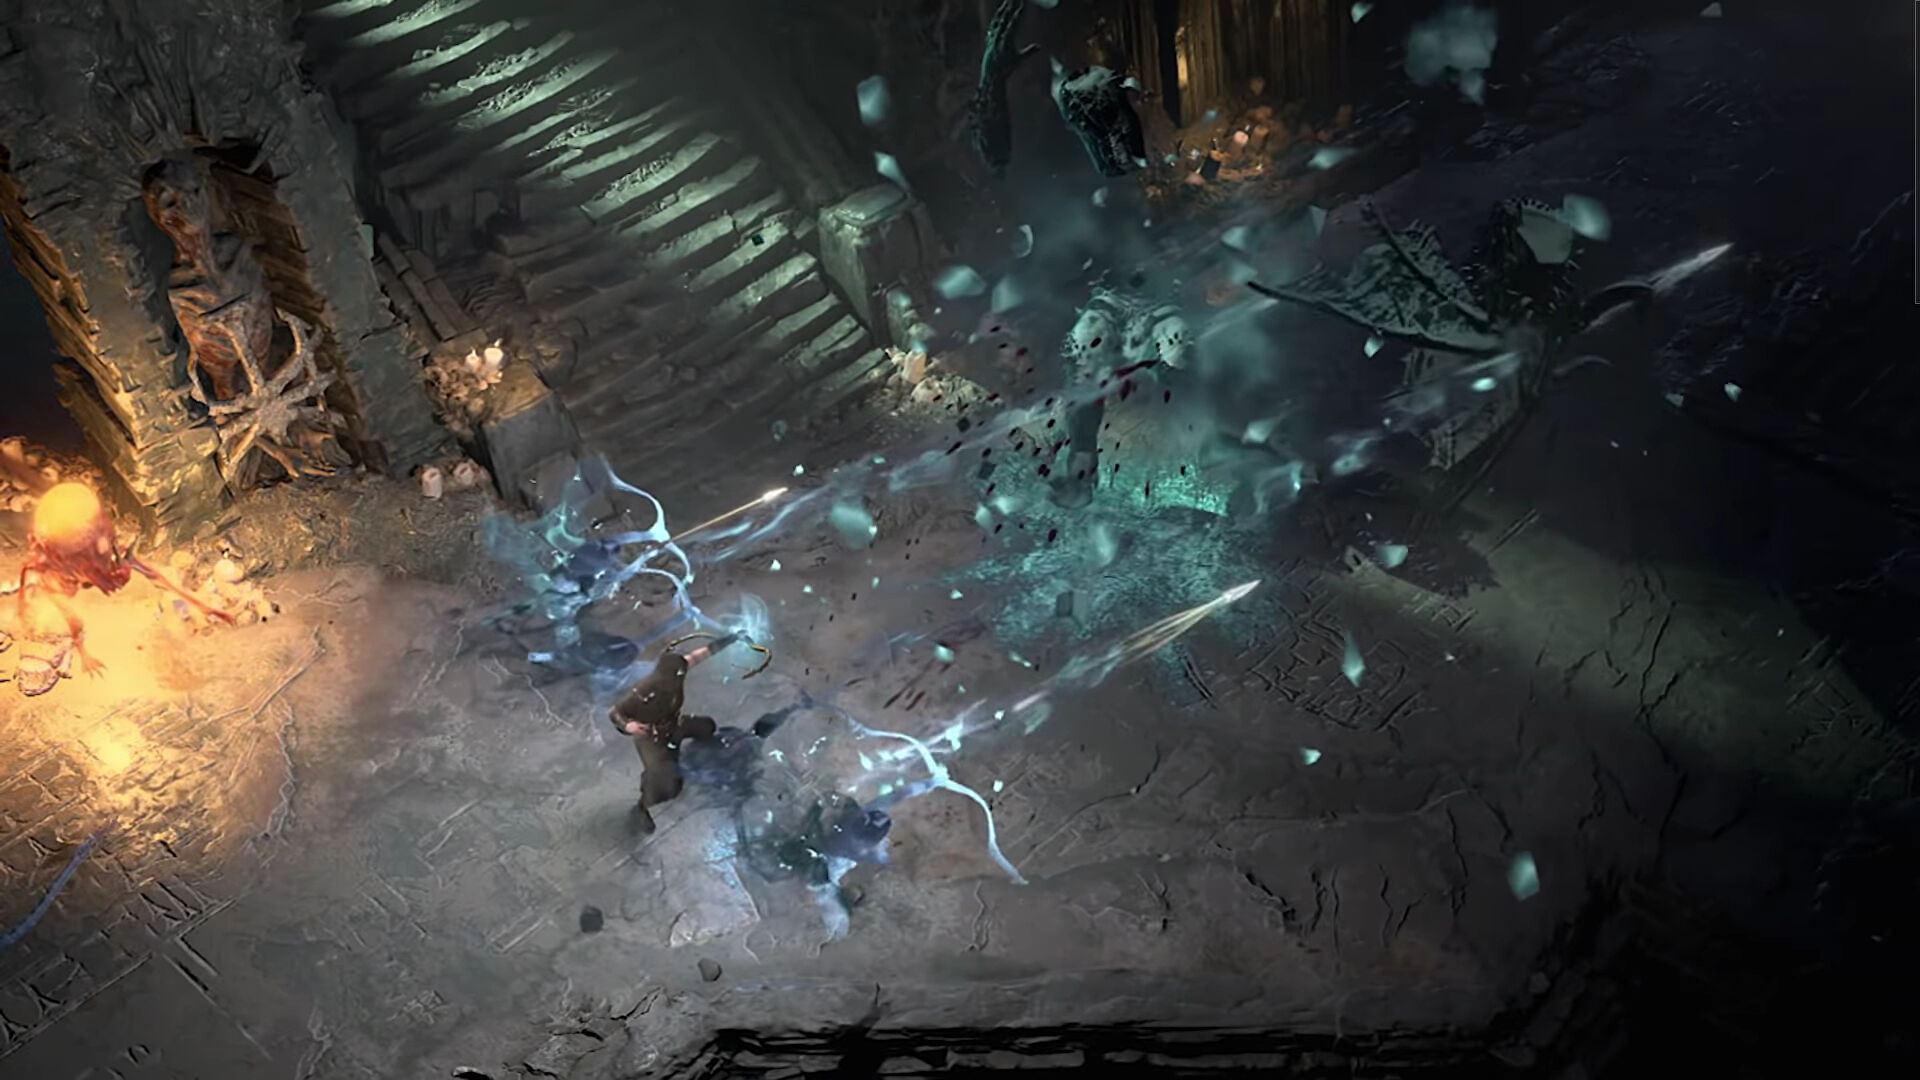 Diablo 4 released shocking statistics, the total playing time of gamers is more than 7,000 years - Photo 2.